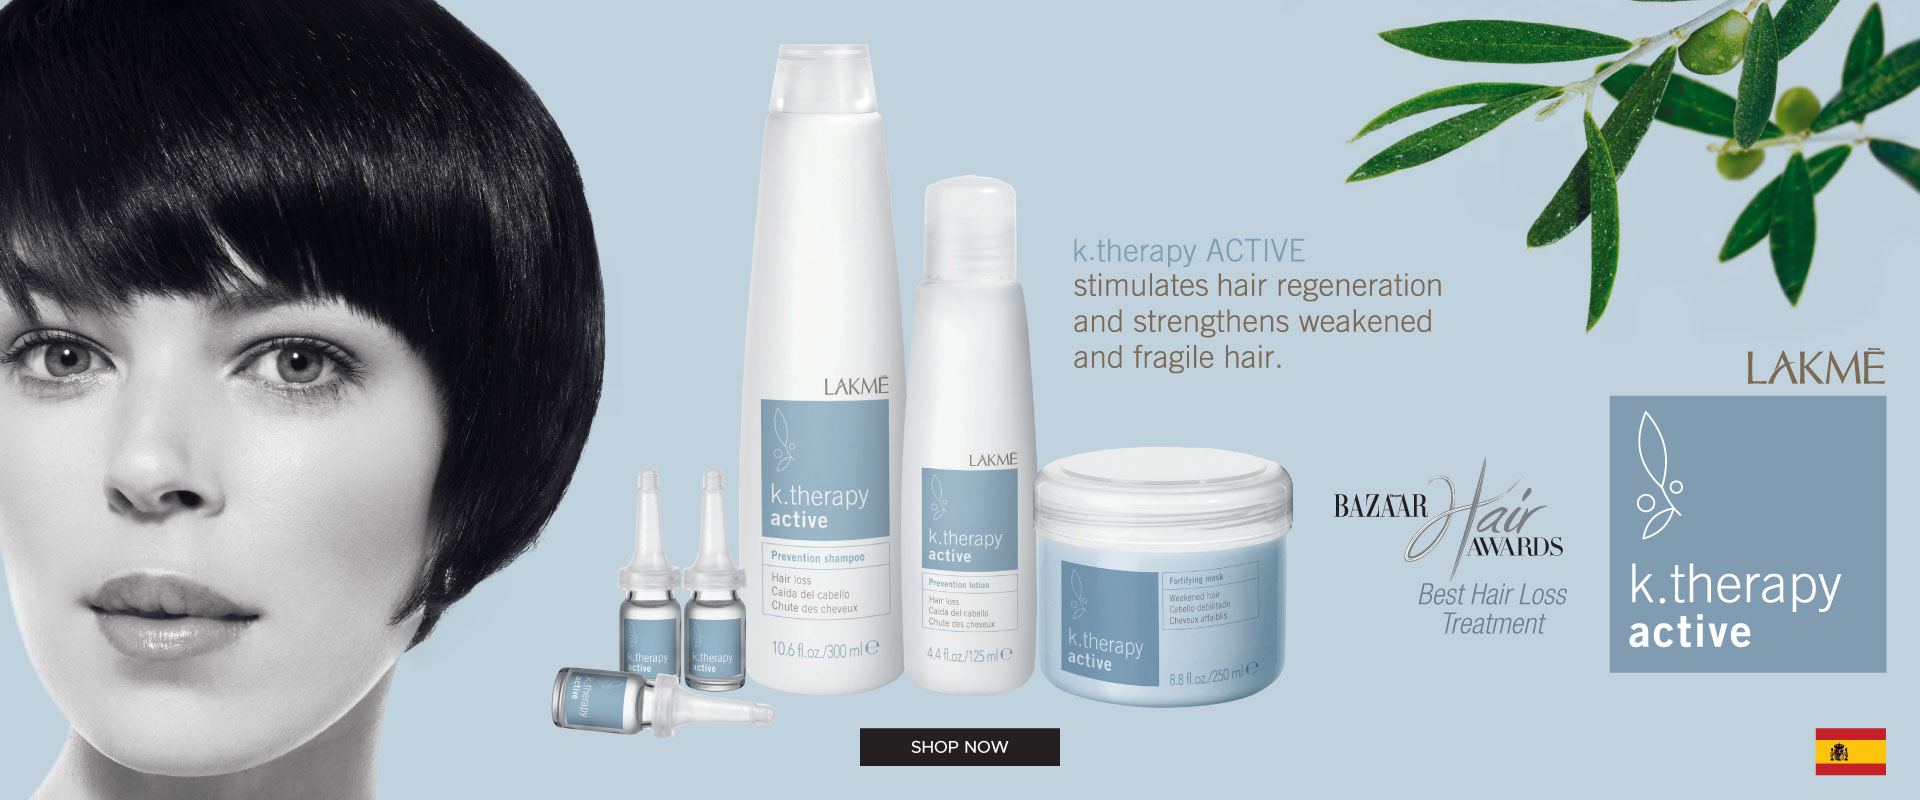 [Homepage] Lakme K.Therapy Active